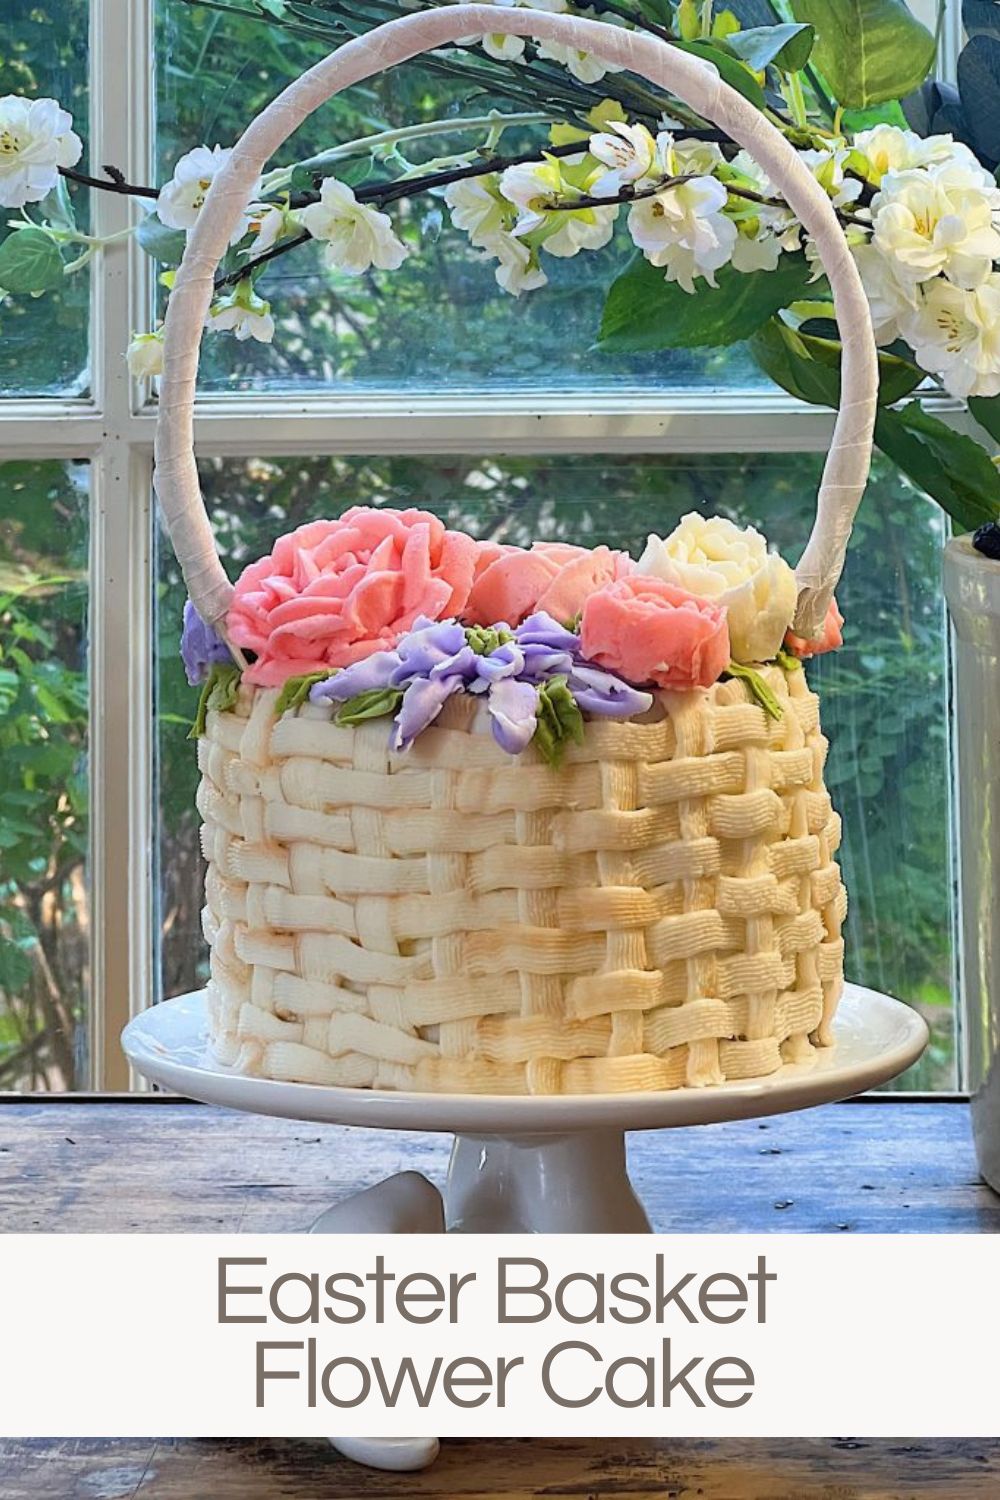 Yes, you read that correctly. Easter basket flower cake. Are you looking for a stunning centerpiece for your Easter table? This is it!  